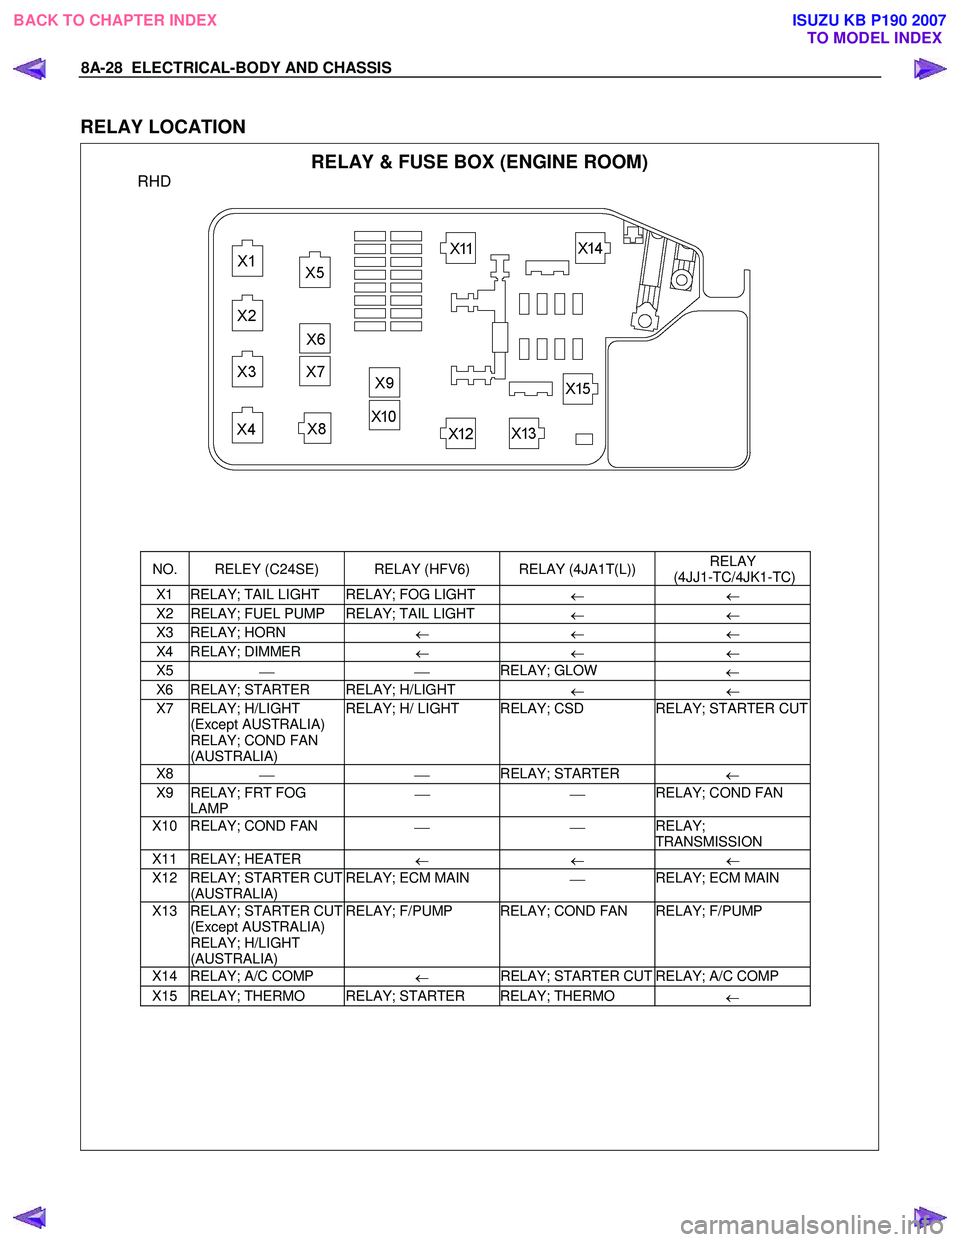 ISUZU KB P190 2007  Workshop User Guide 8A-28  ELECTRICAL-BODY AND CHASSIS 
 
RELAY LOCATION 
 RELAY & FUSE BOX (ENGINE ROOM) 
RHD 
 
 
  
 
 
 
NO.  RELEY (C24SE)  RELAY (HFV6)  RELAY (4JA1T(L))  RELAY 
 (4JJ1-TC/4JK1-TC) 
X1  RELAY; TAIL 